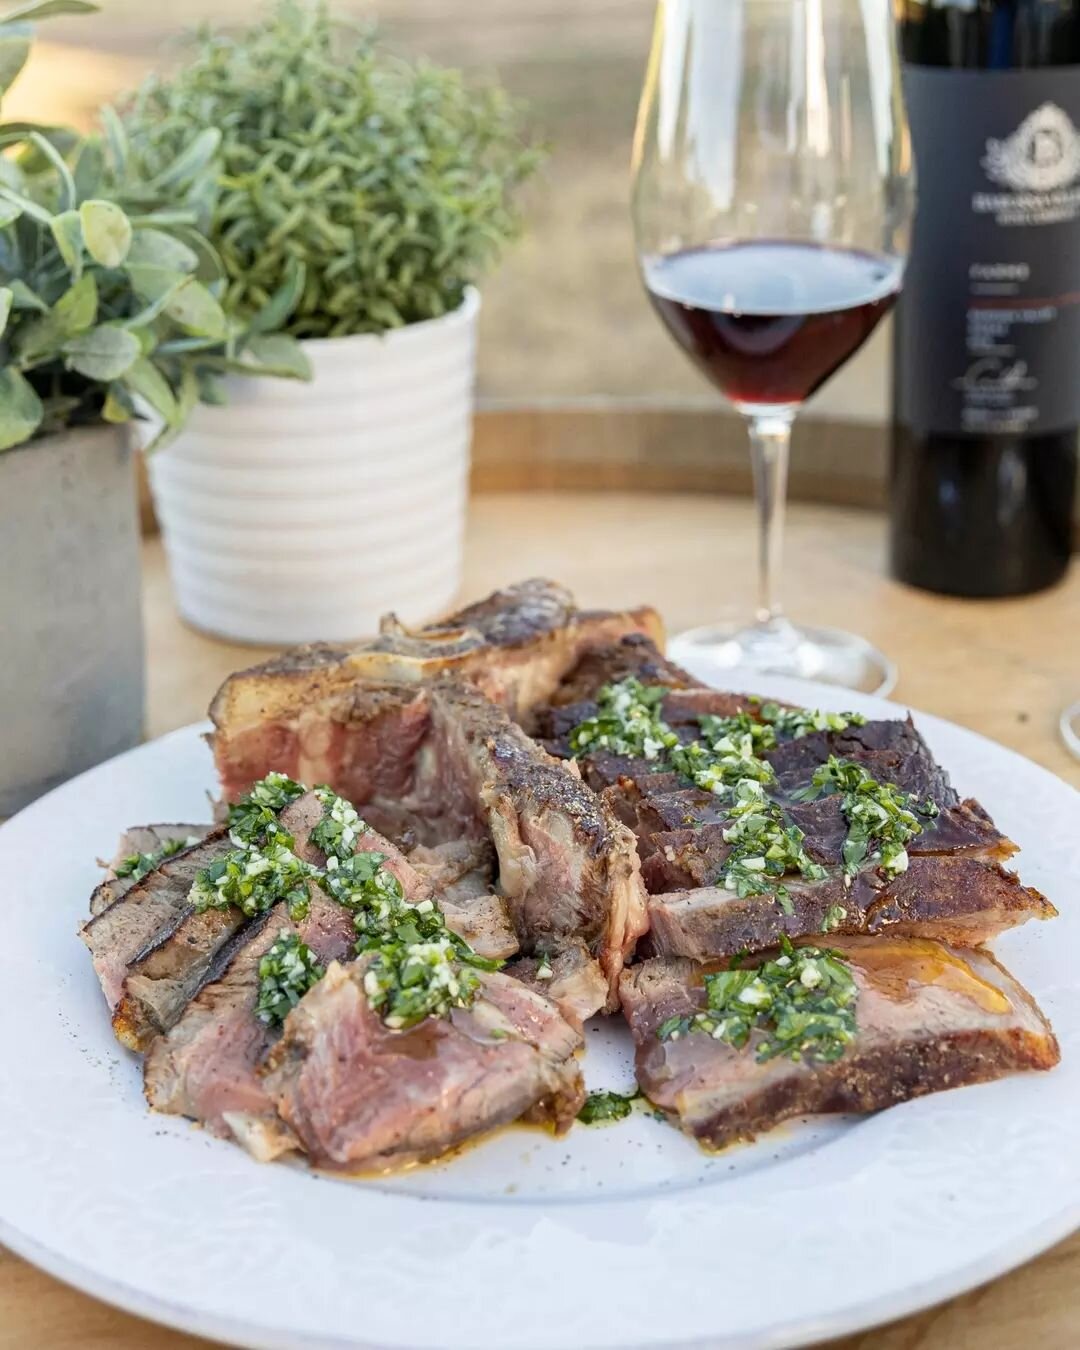 If you love steak and wine, this one is for you! Tender and juicy Bistecca Fiorentina paired with a glass of gorgeous Shiraz from @barossavalleywinecompany - a perfect combo for a Saturday night👌🍷&nbsp;Find the recipe on the website!